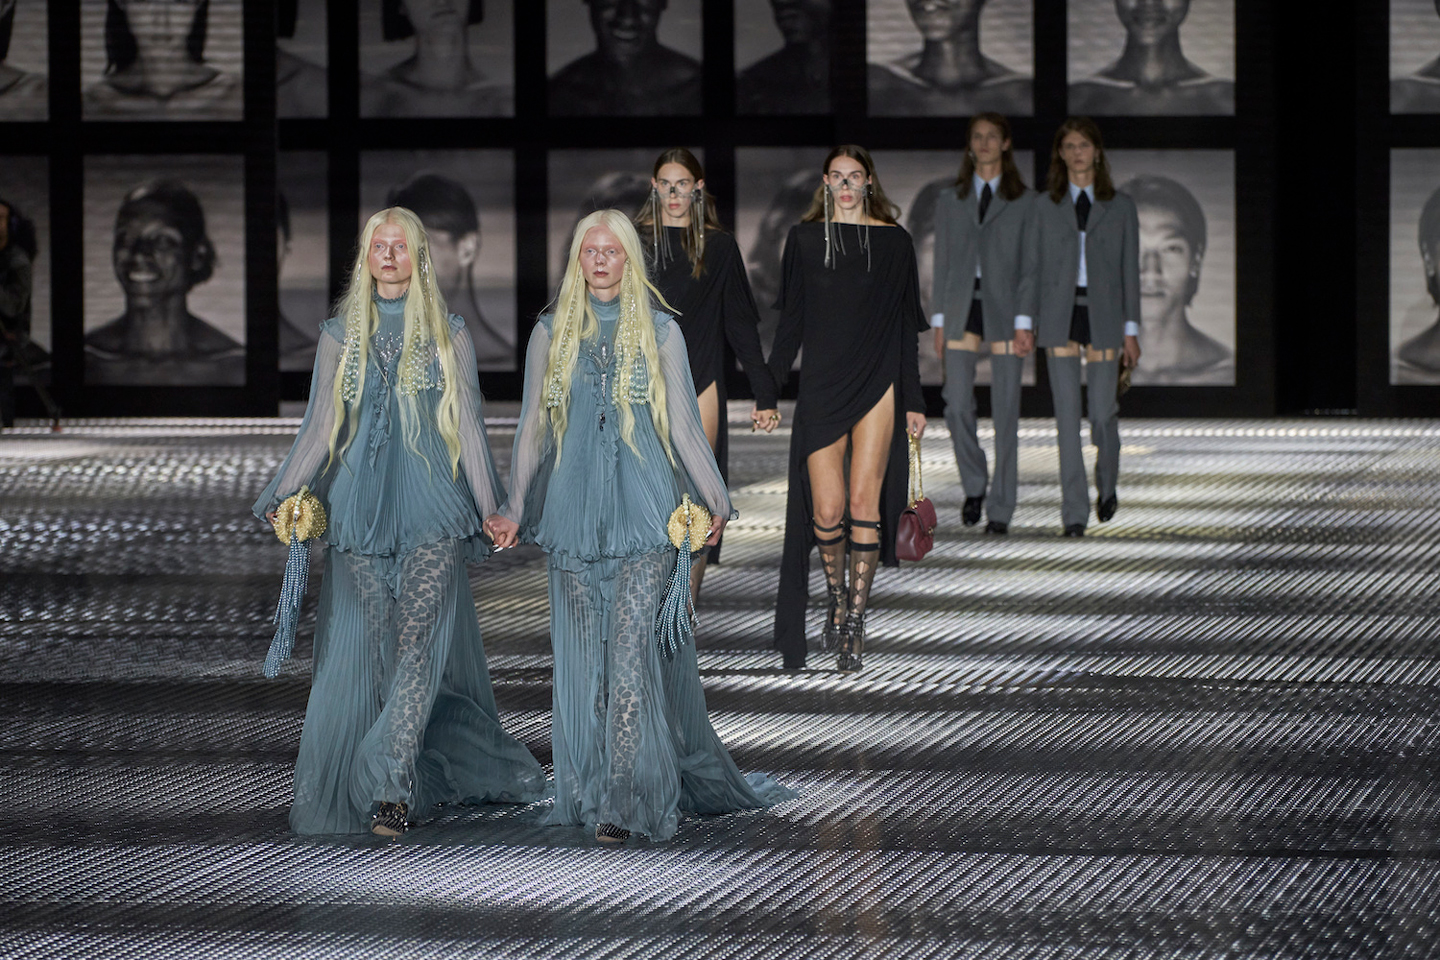 Everyone at the Gucci show saw double, as sets of twins walked down the runway